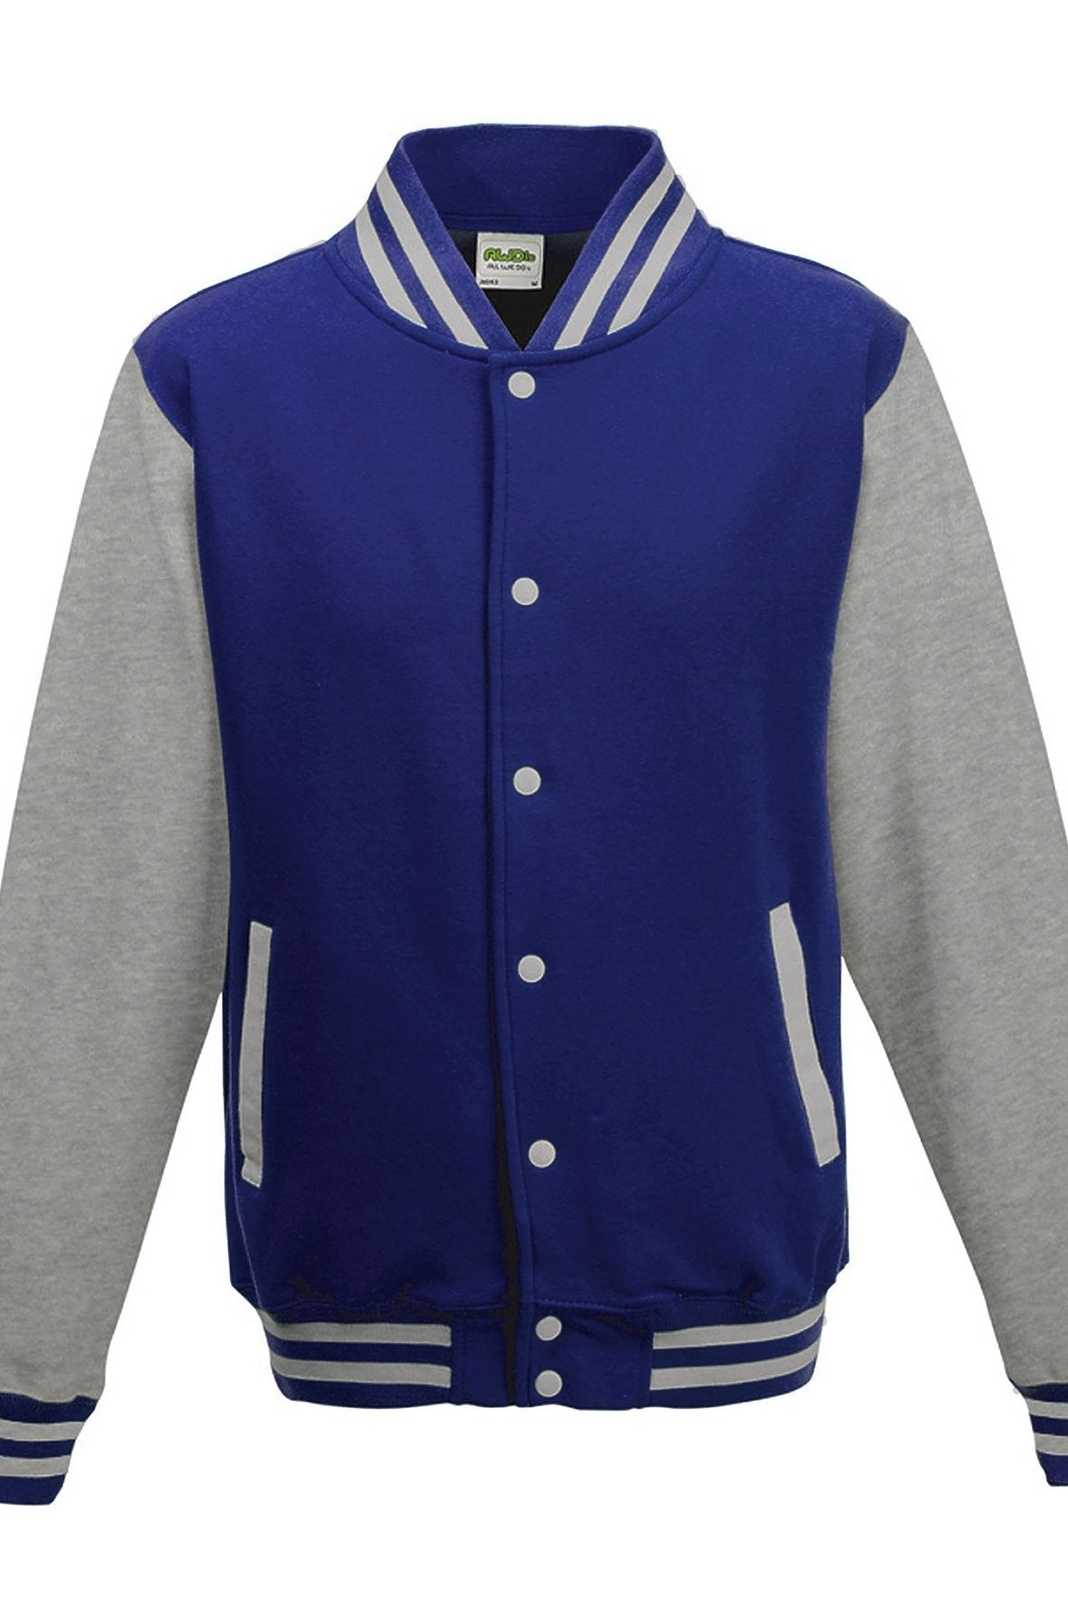 Just Hoods JHY043 Youth Letterman Jacket - Royal Blue Heather Gray - HIT a Double